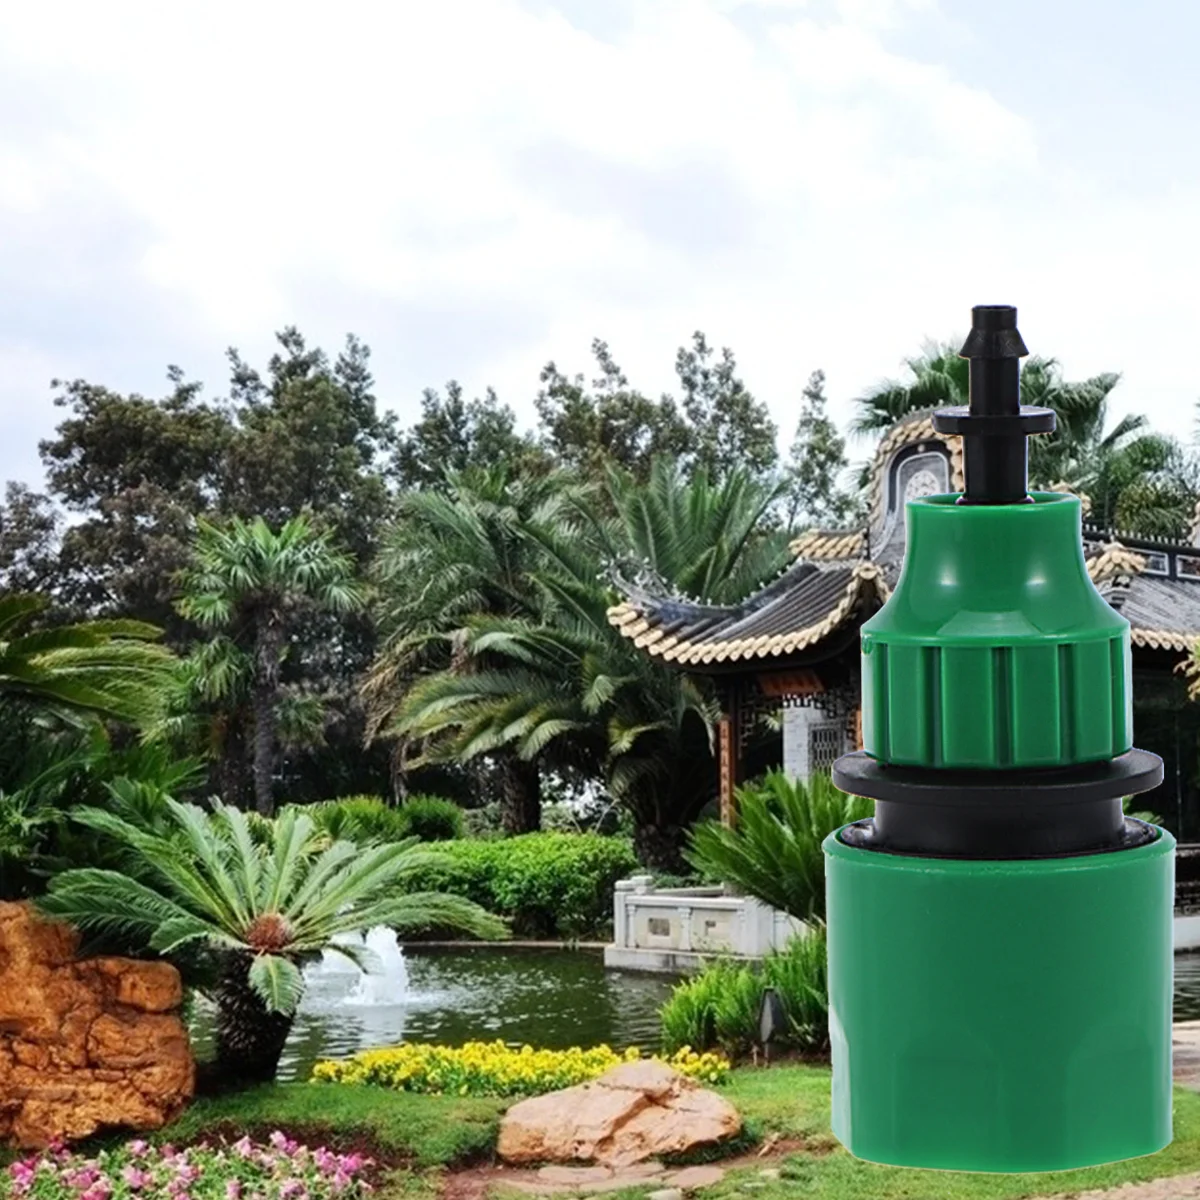 

Hose Connector Quick Irrigation Garden Tap Adapter Fitting Thread Connect Internal Tubing Fittings Water Plastic Connectors Drip